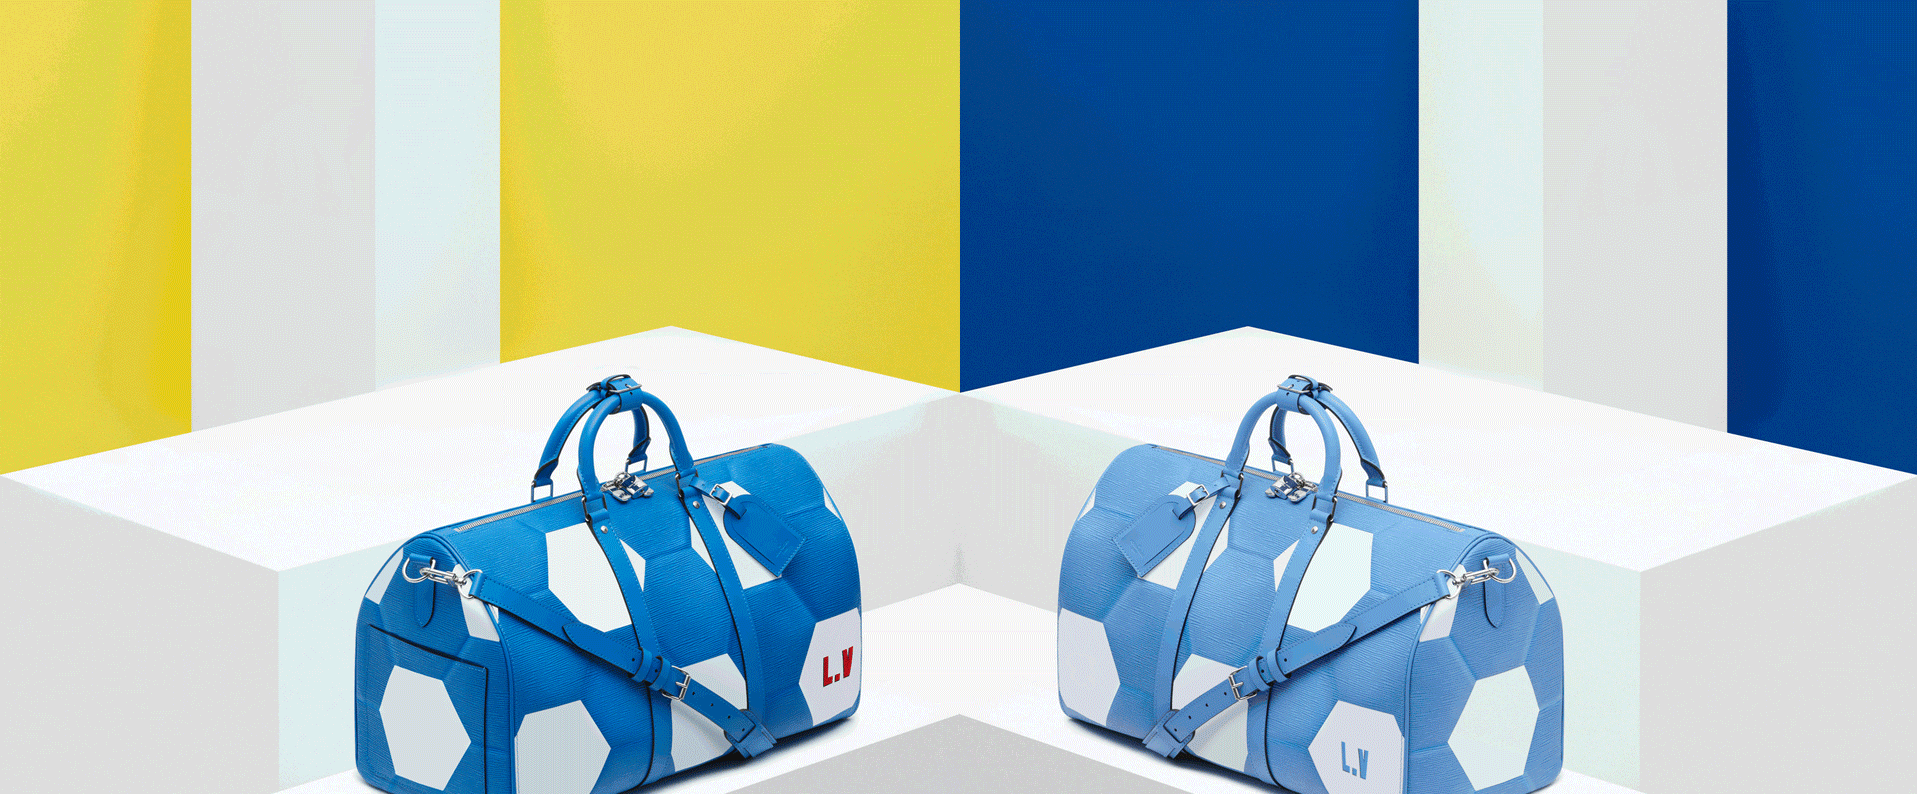 Louis Vuitton Kicks Off the 2018 World Cup with an Exclusive Collection